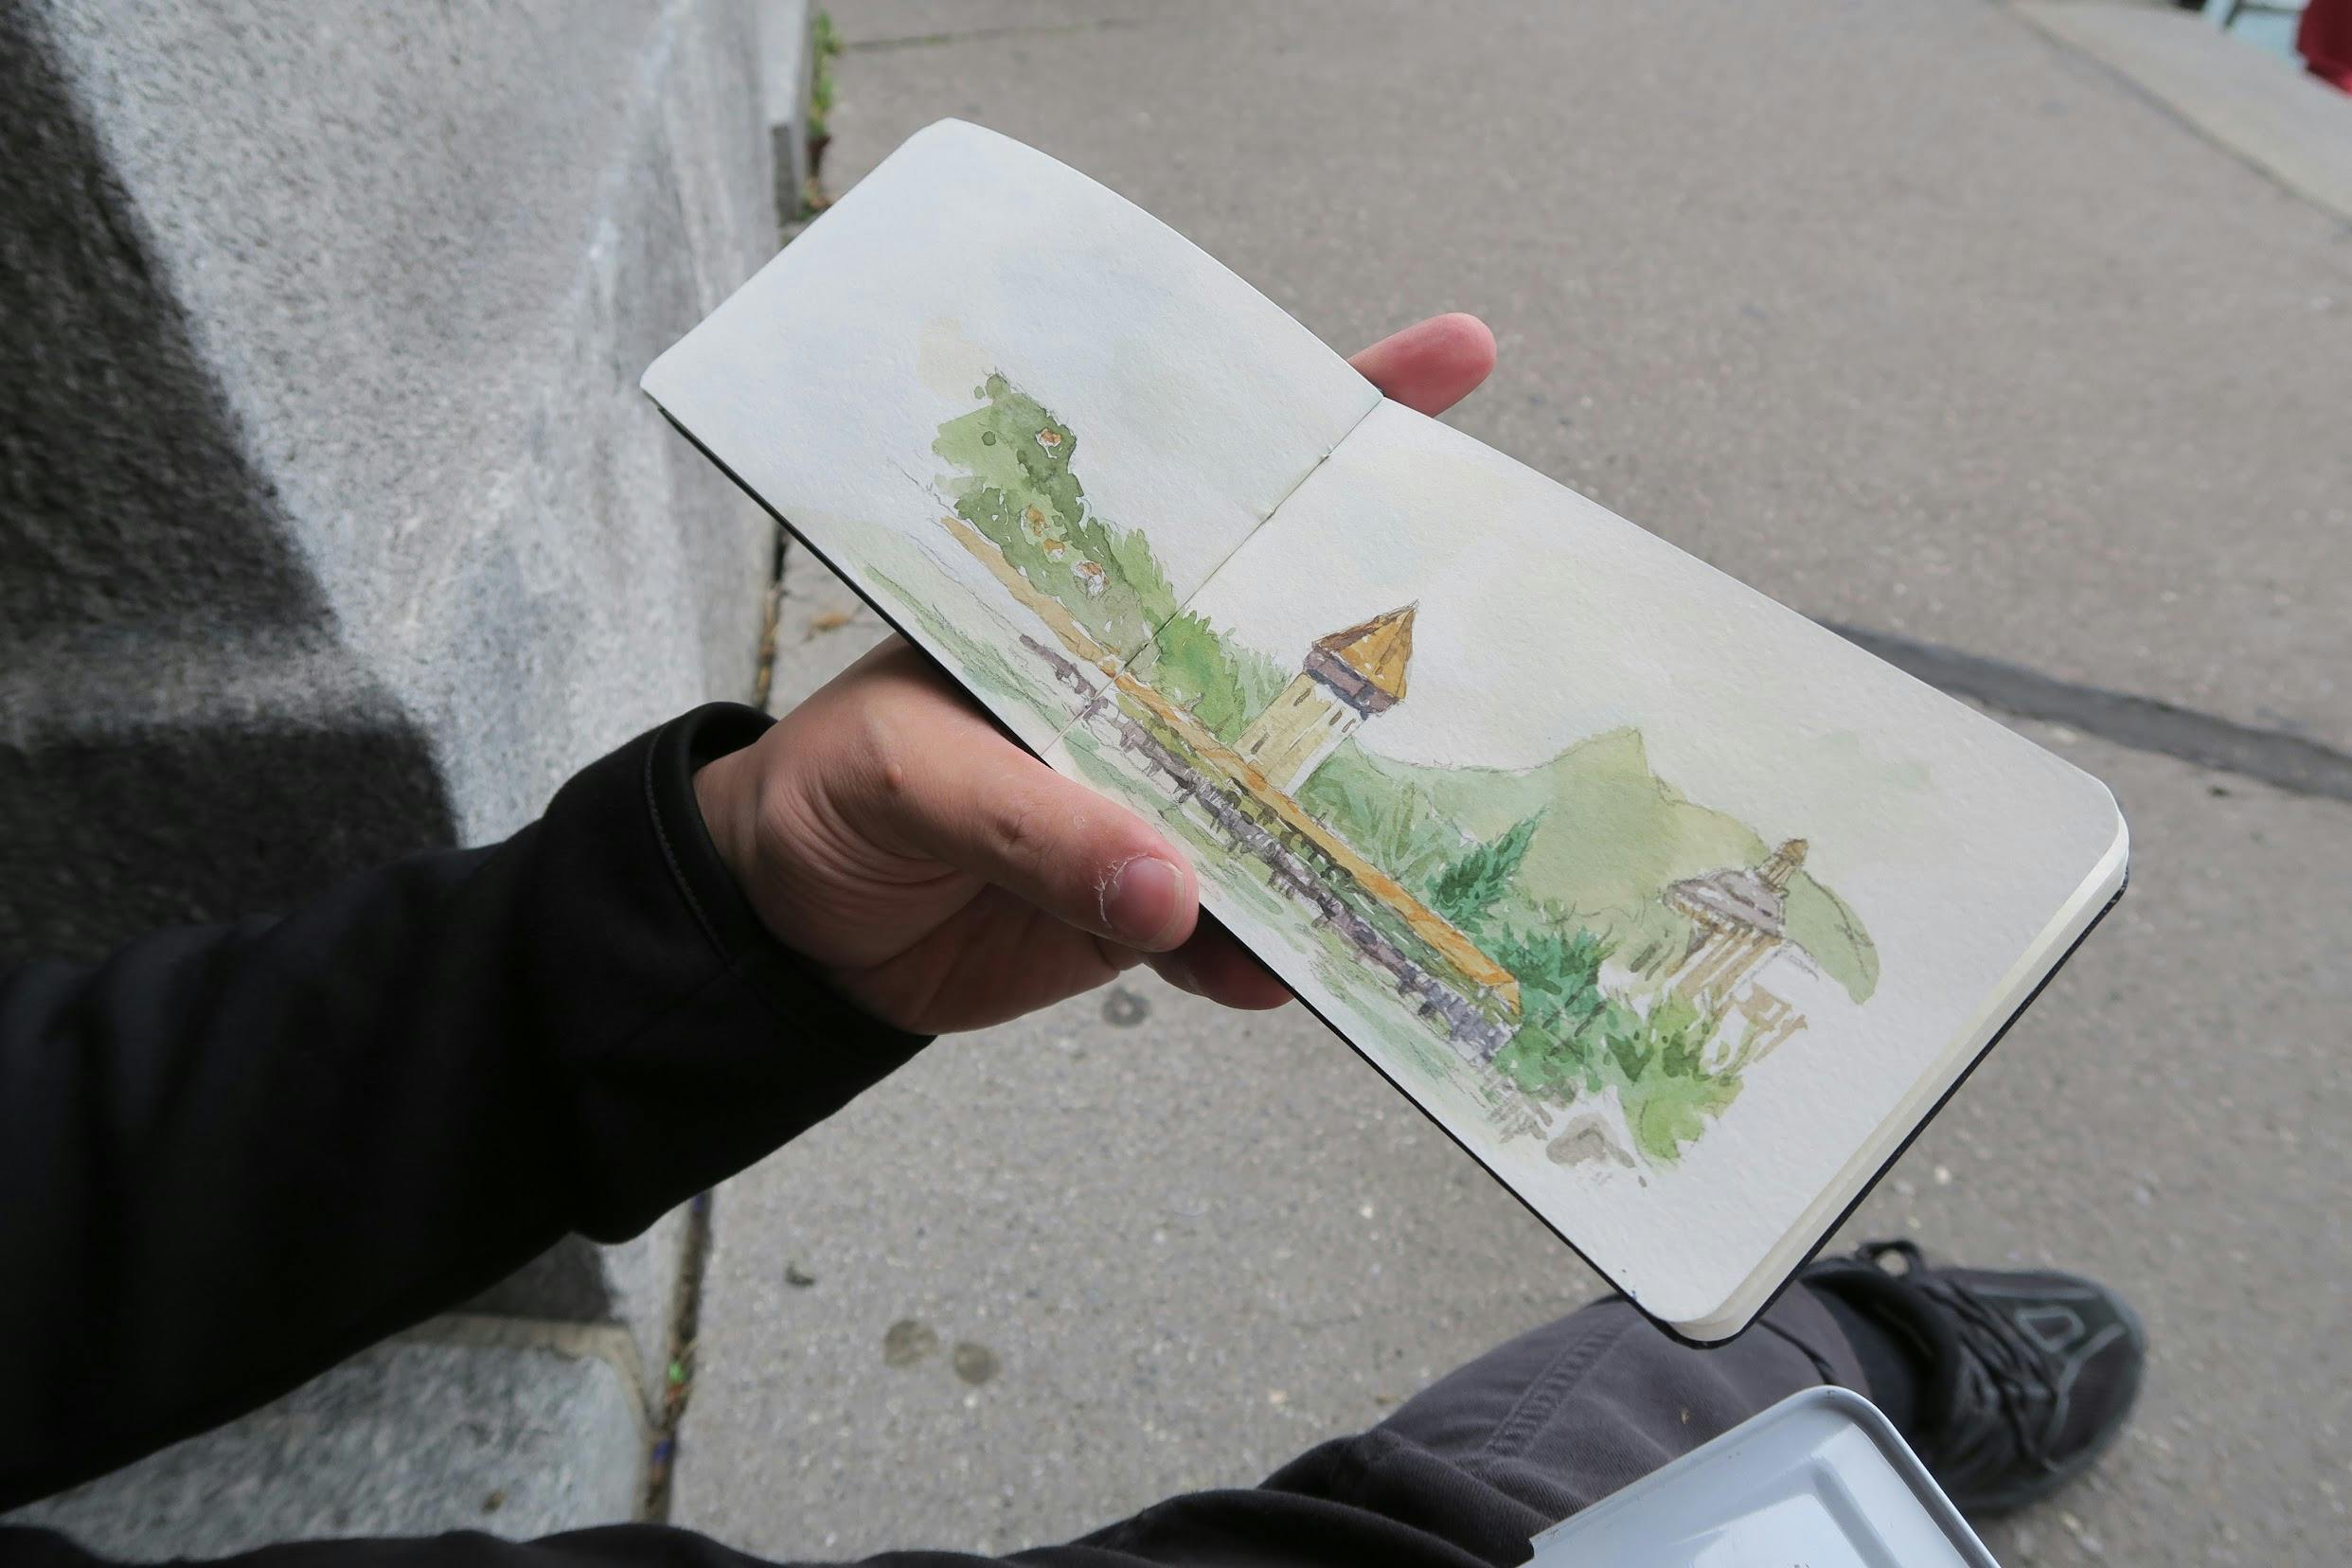 Watercolor sketch by Aluan (courtesy of the artist)